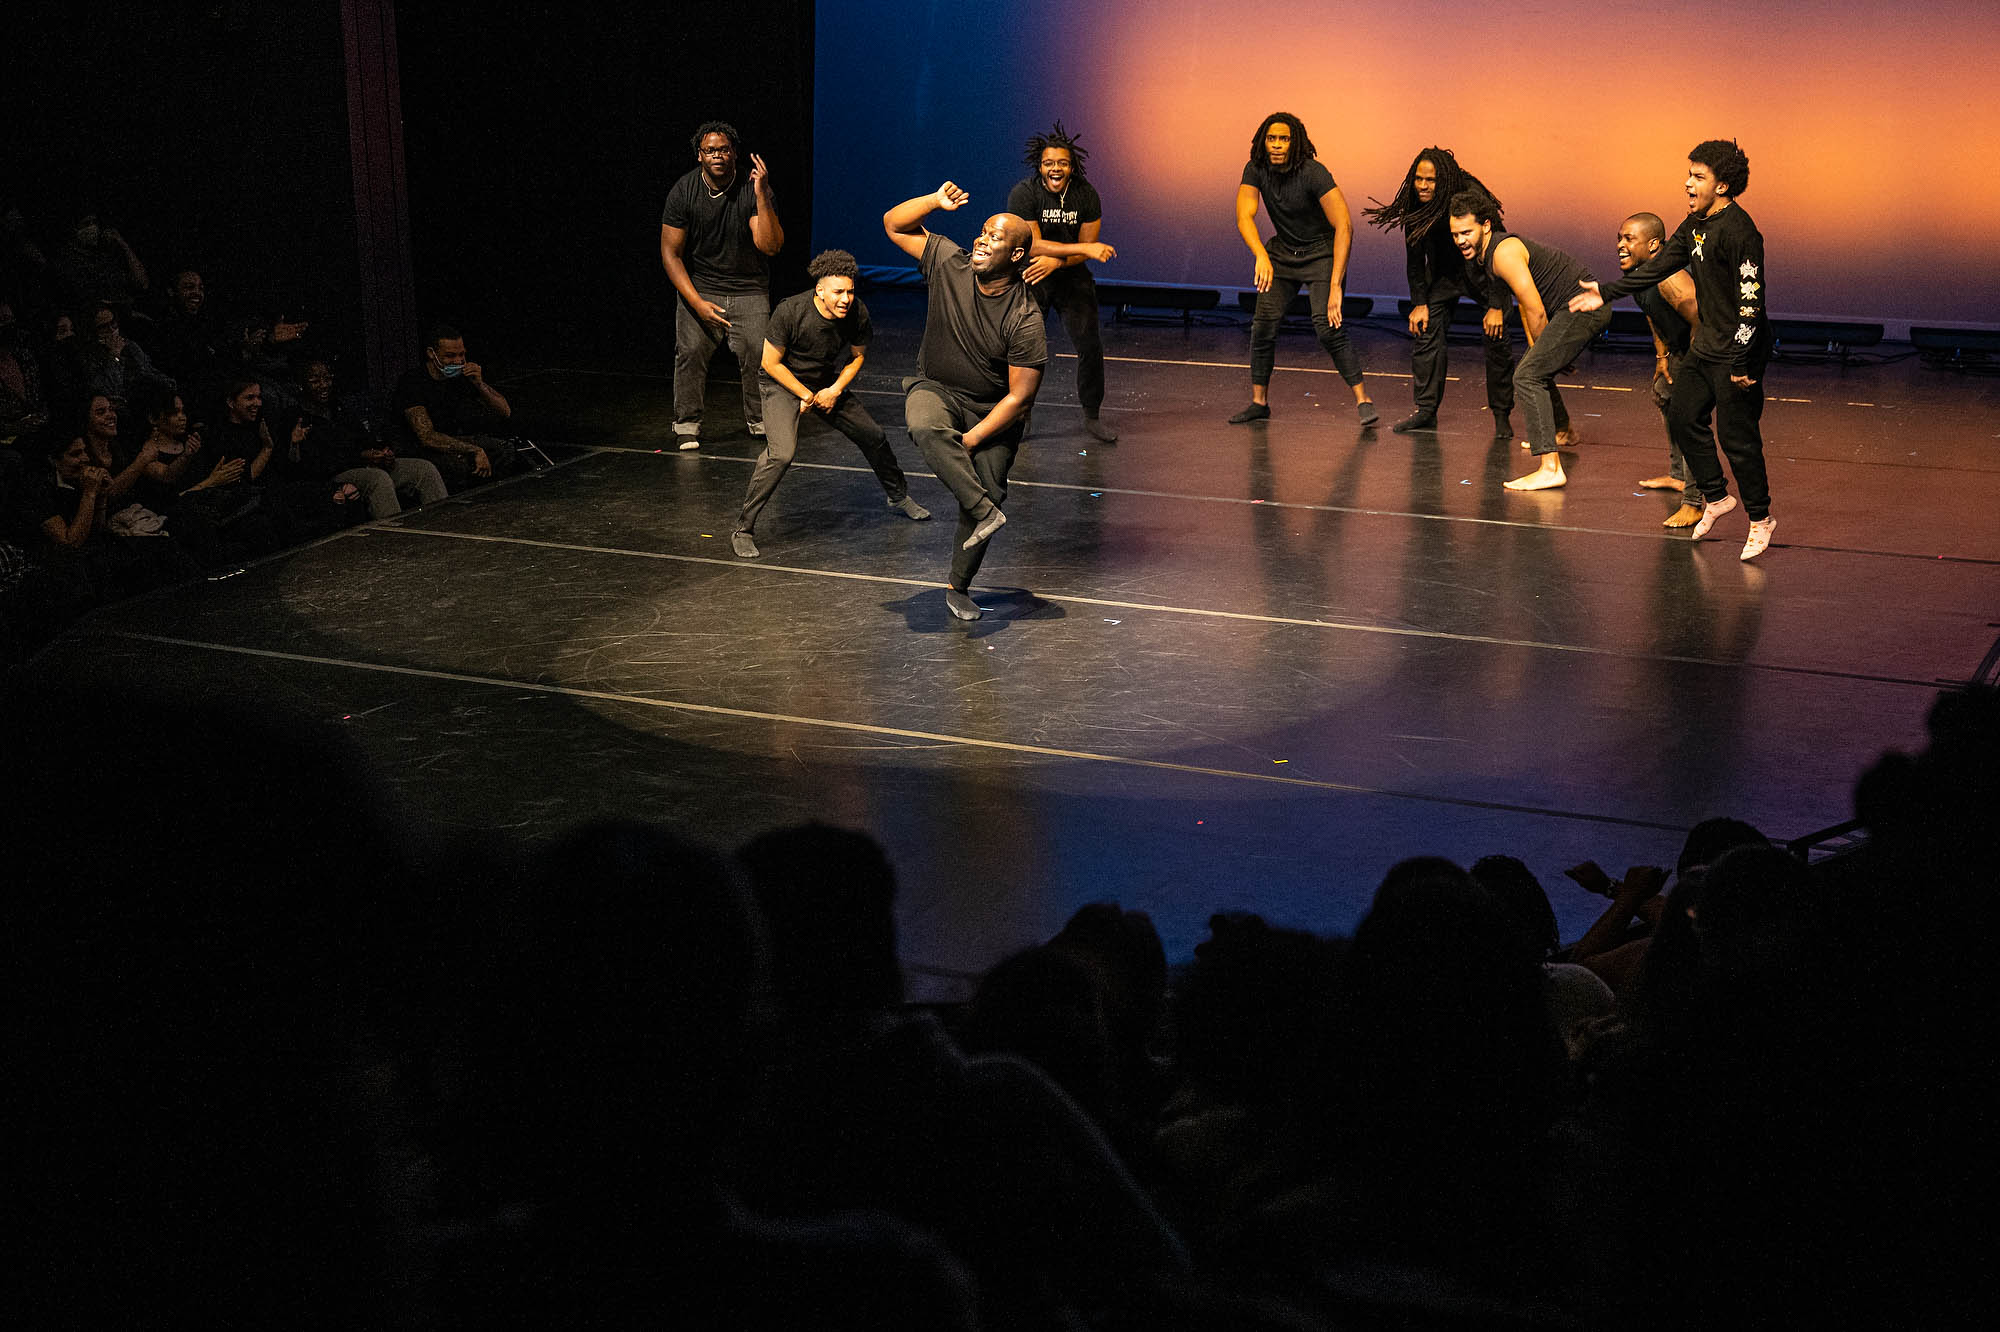 A group of performers dressed in black perform choreography on stage.